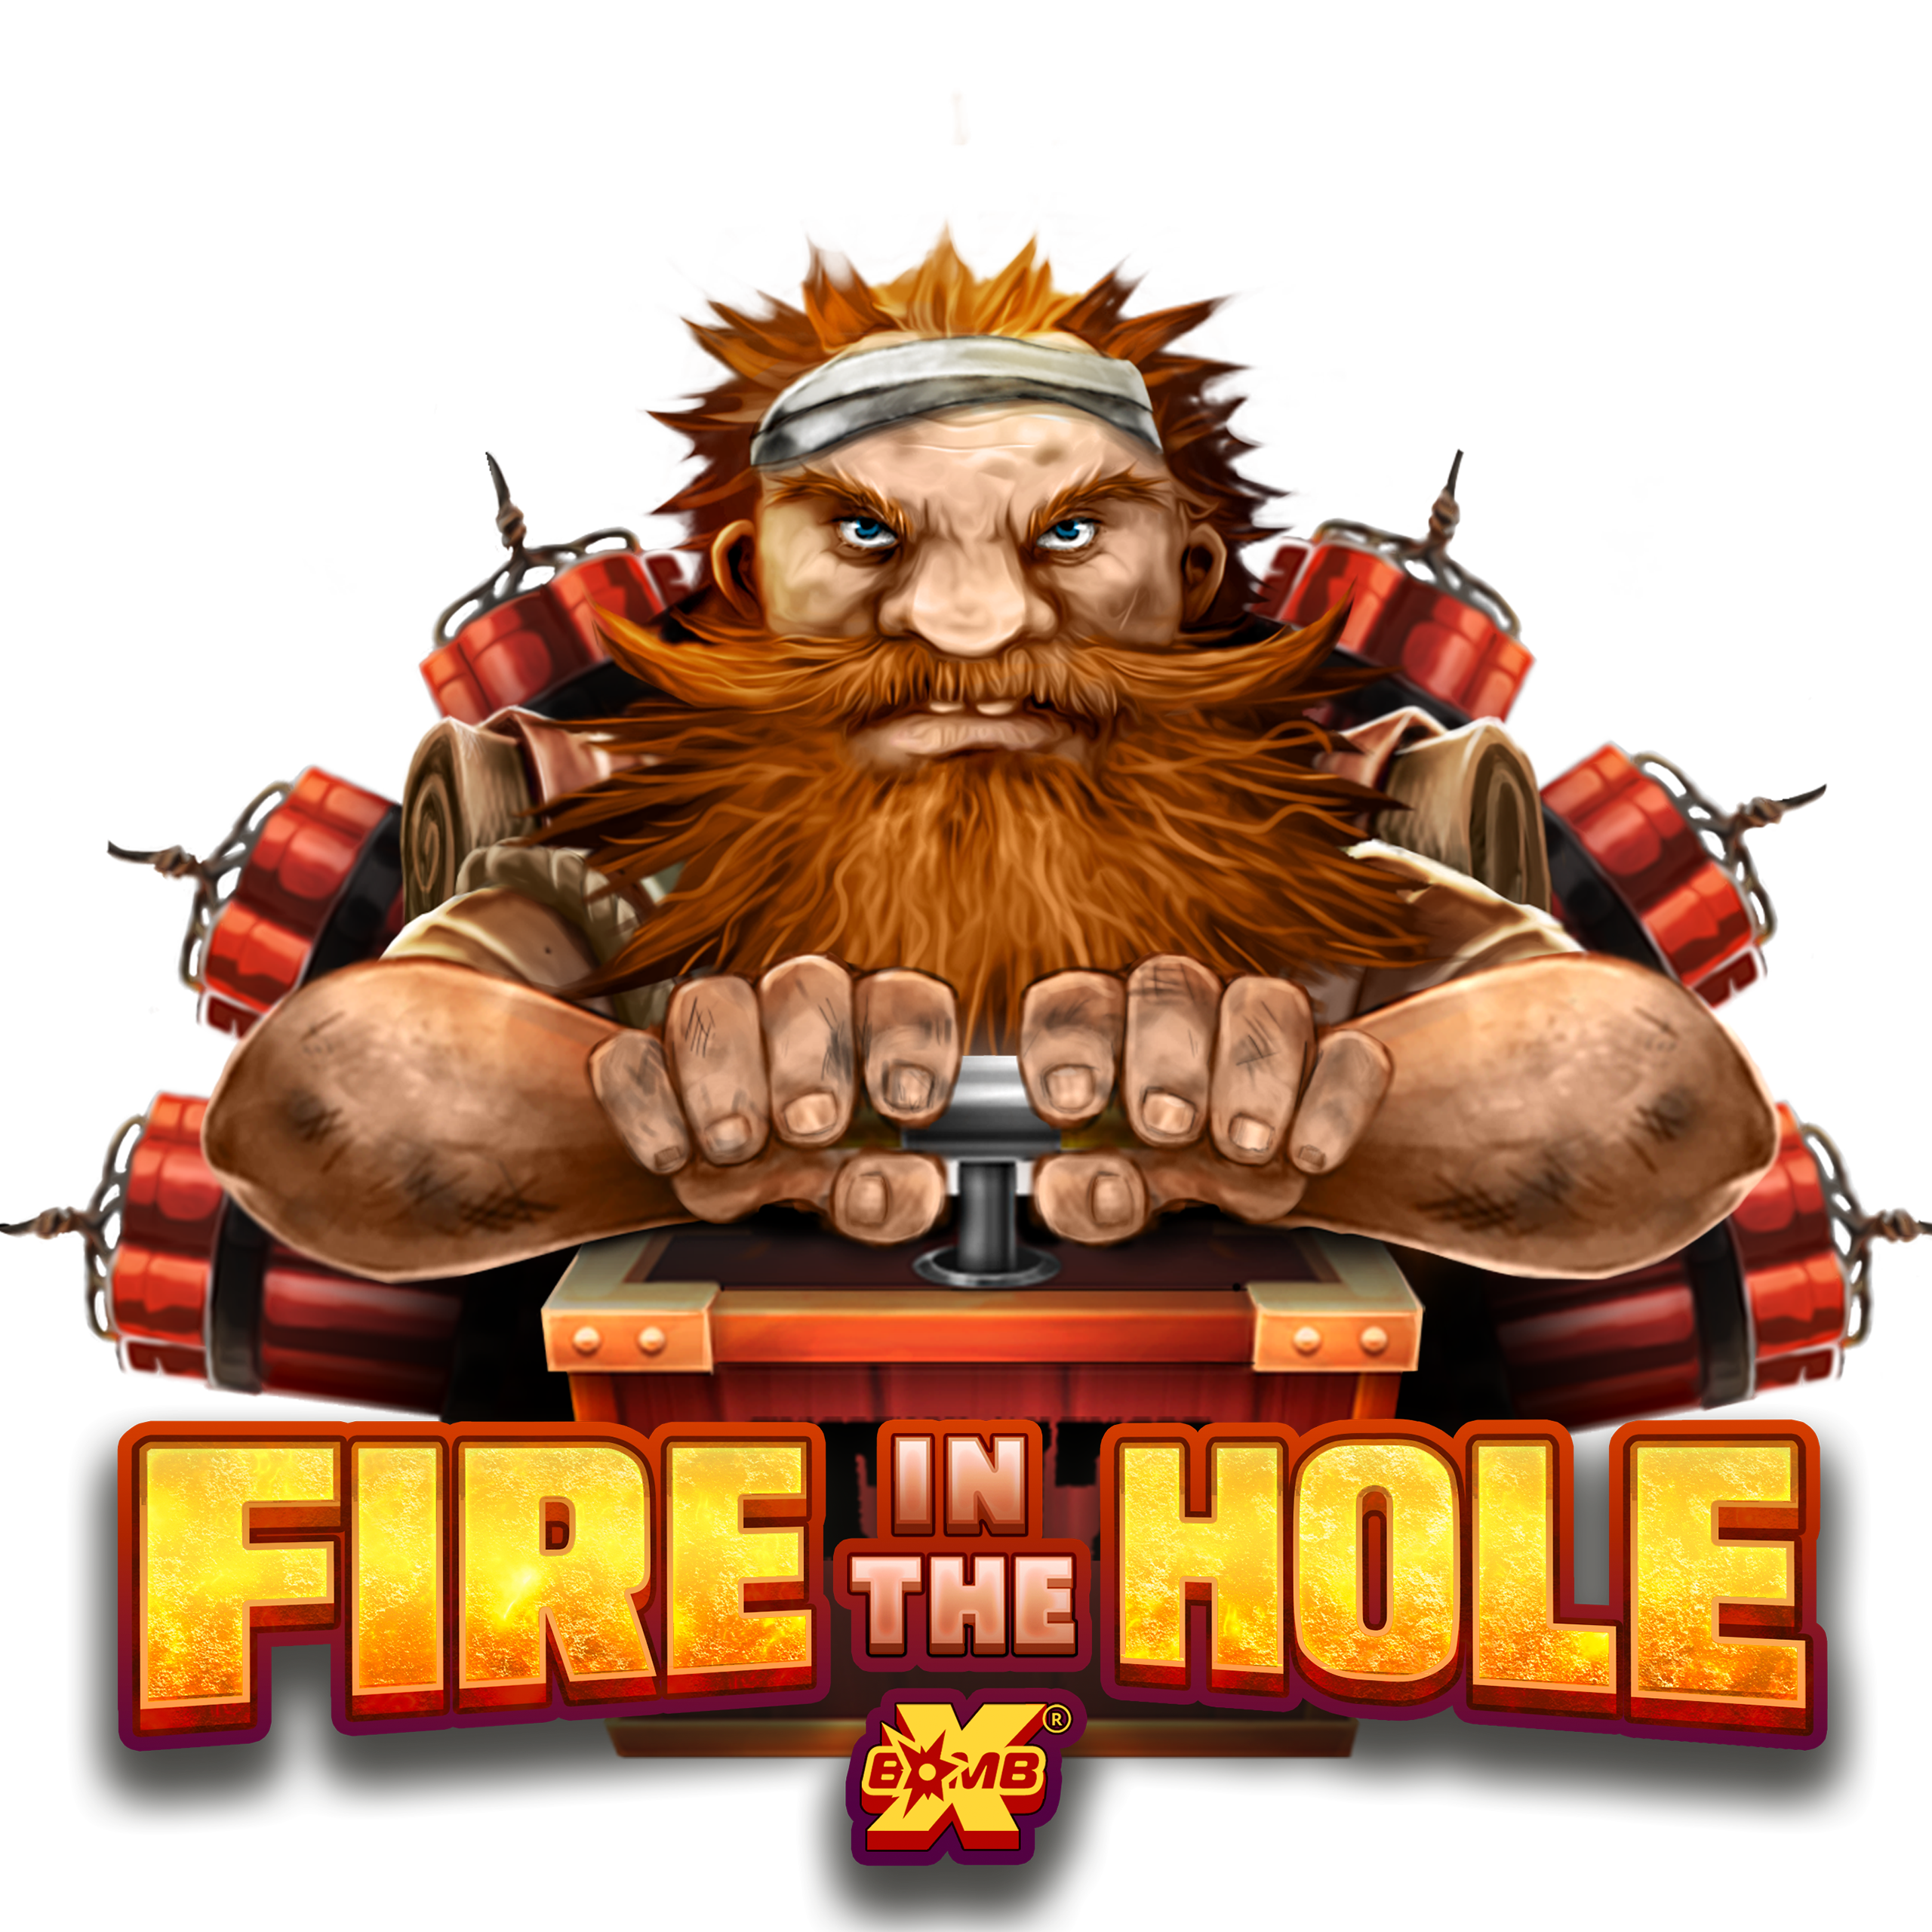 Fire on the hole. Fire hole слот. Fire in the hole казино. Fire in the hole XBOMB. Fire in the hole Slot.